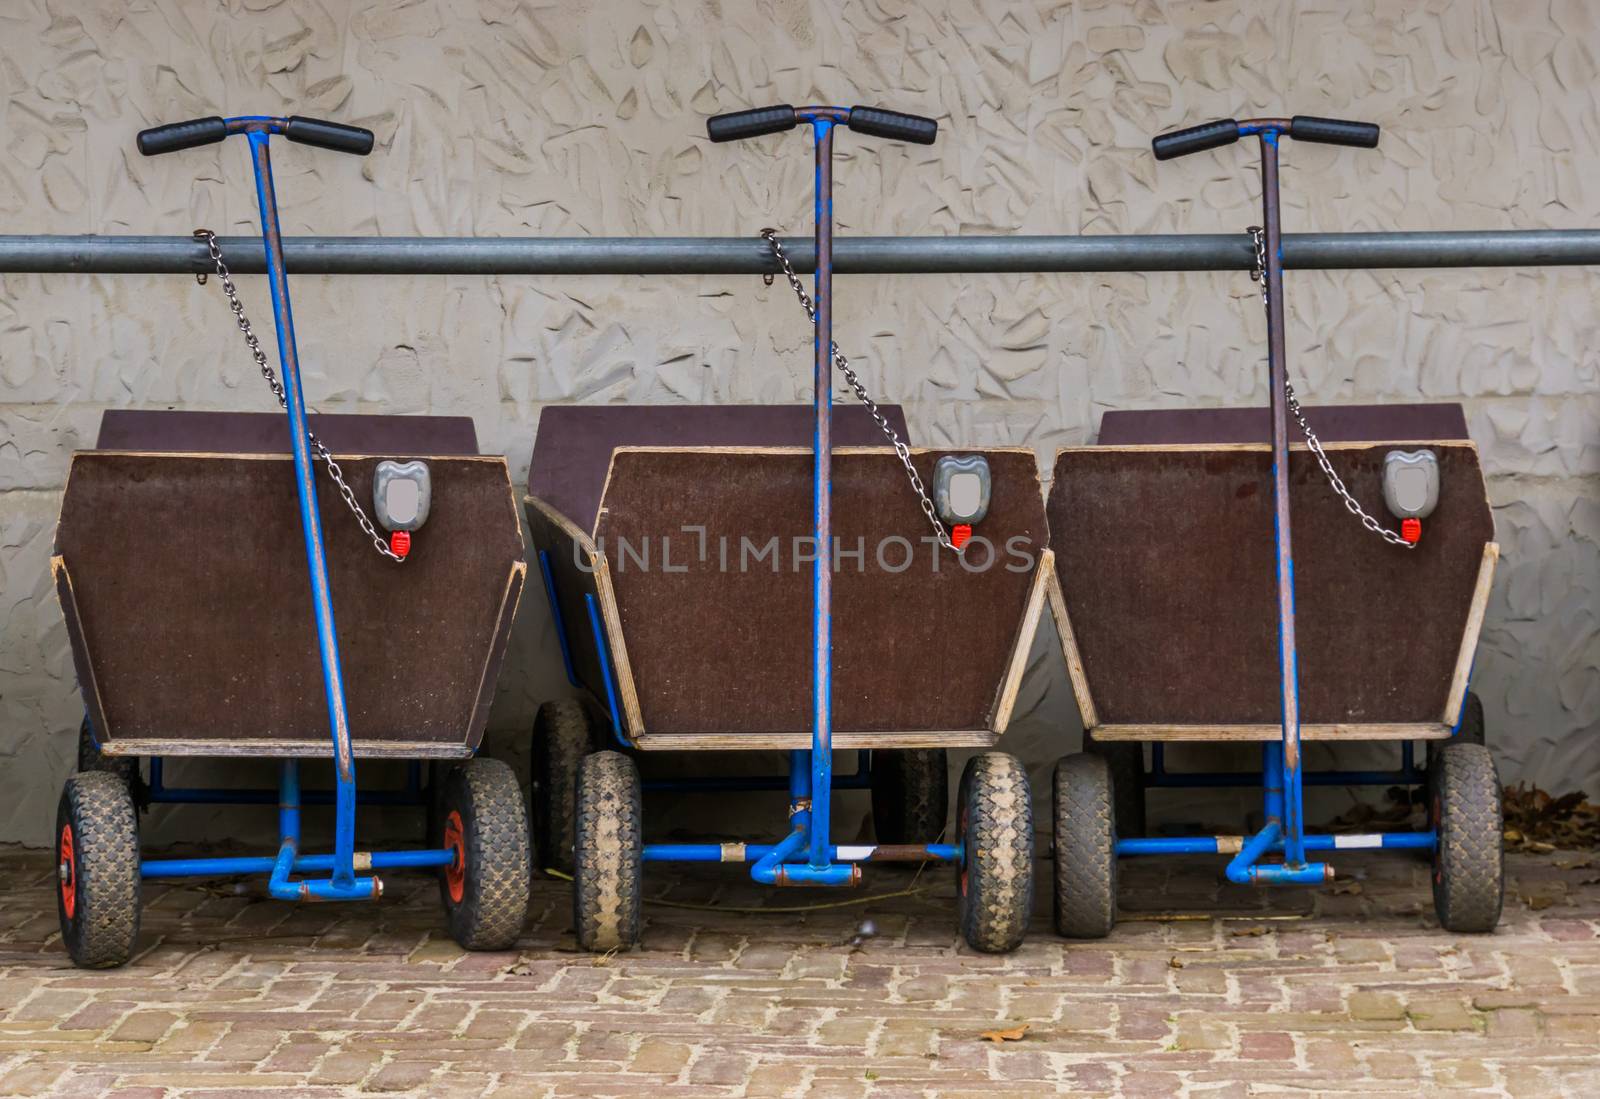 a row of pulling carts for baggage and children, locked and leashed on a metal bar, outdoor transportation by charlottebleijenberg